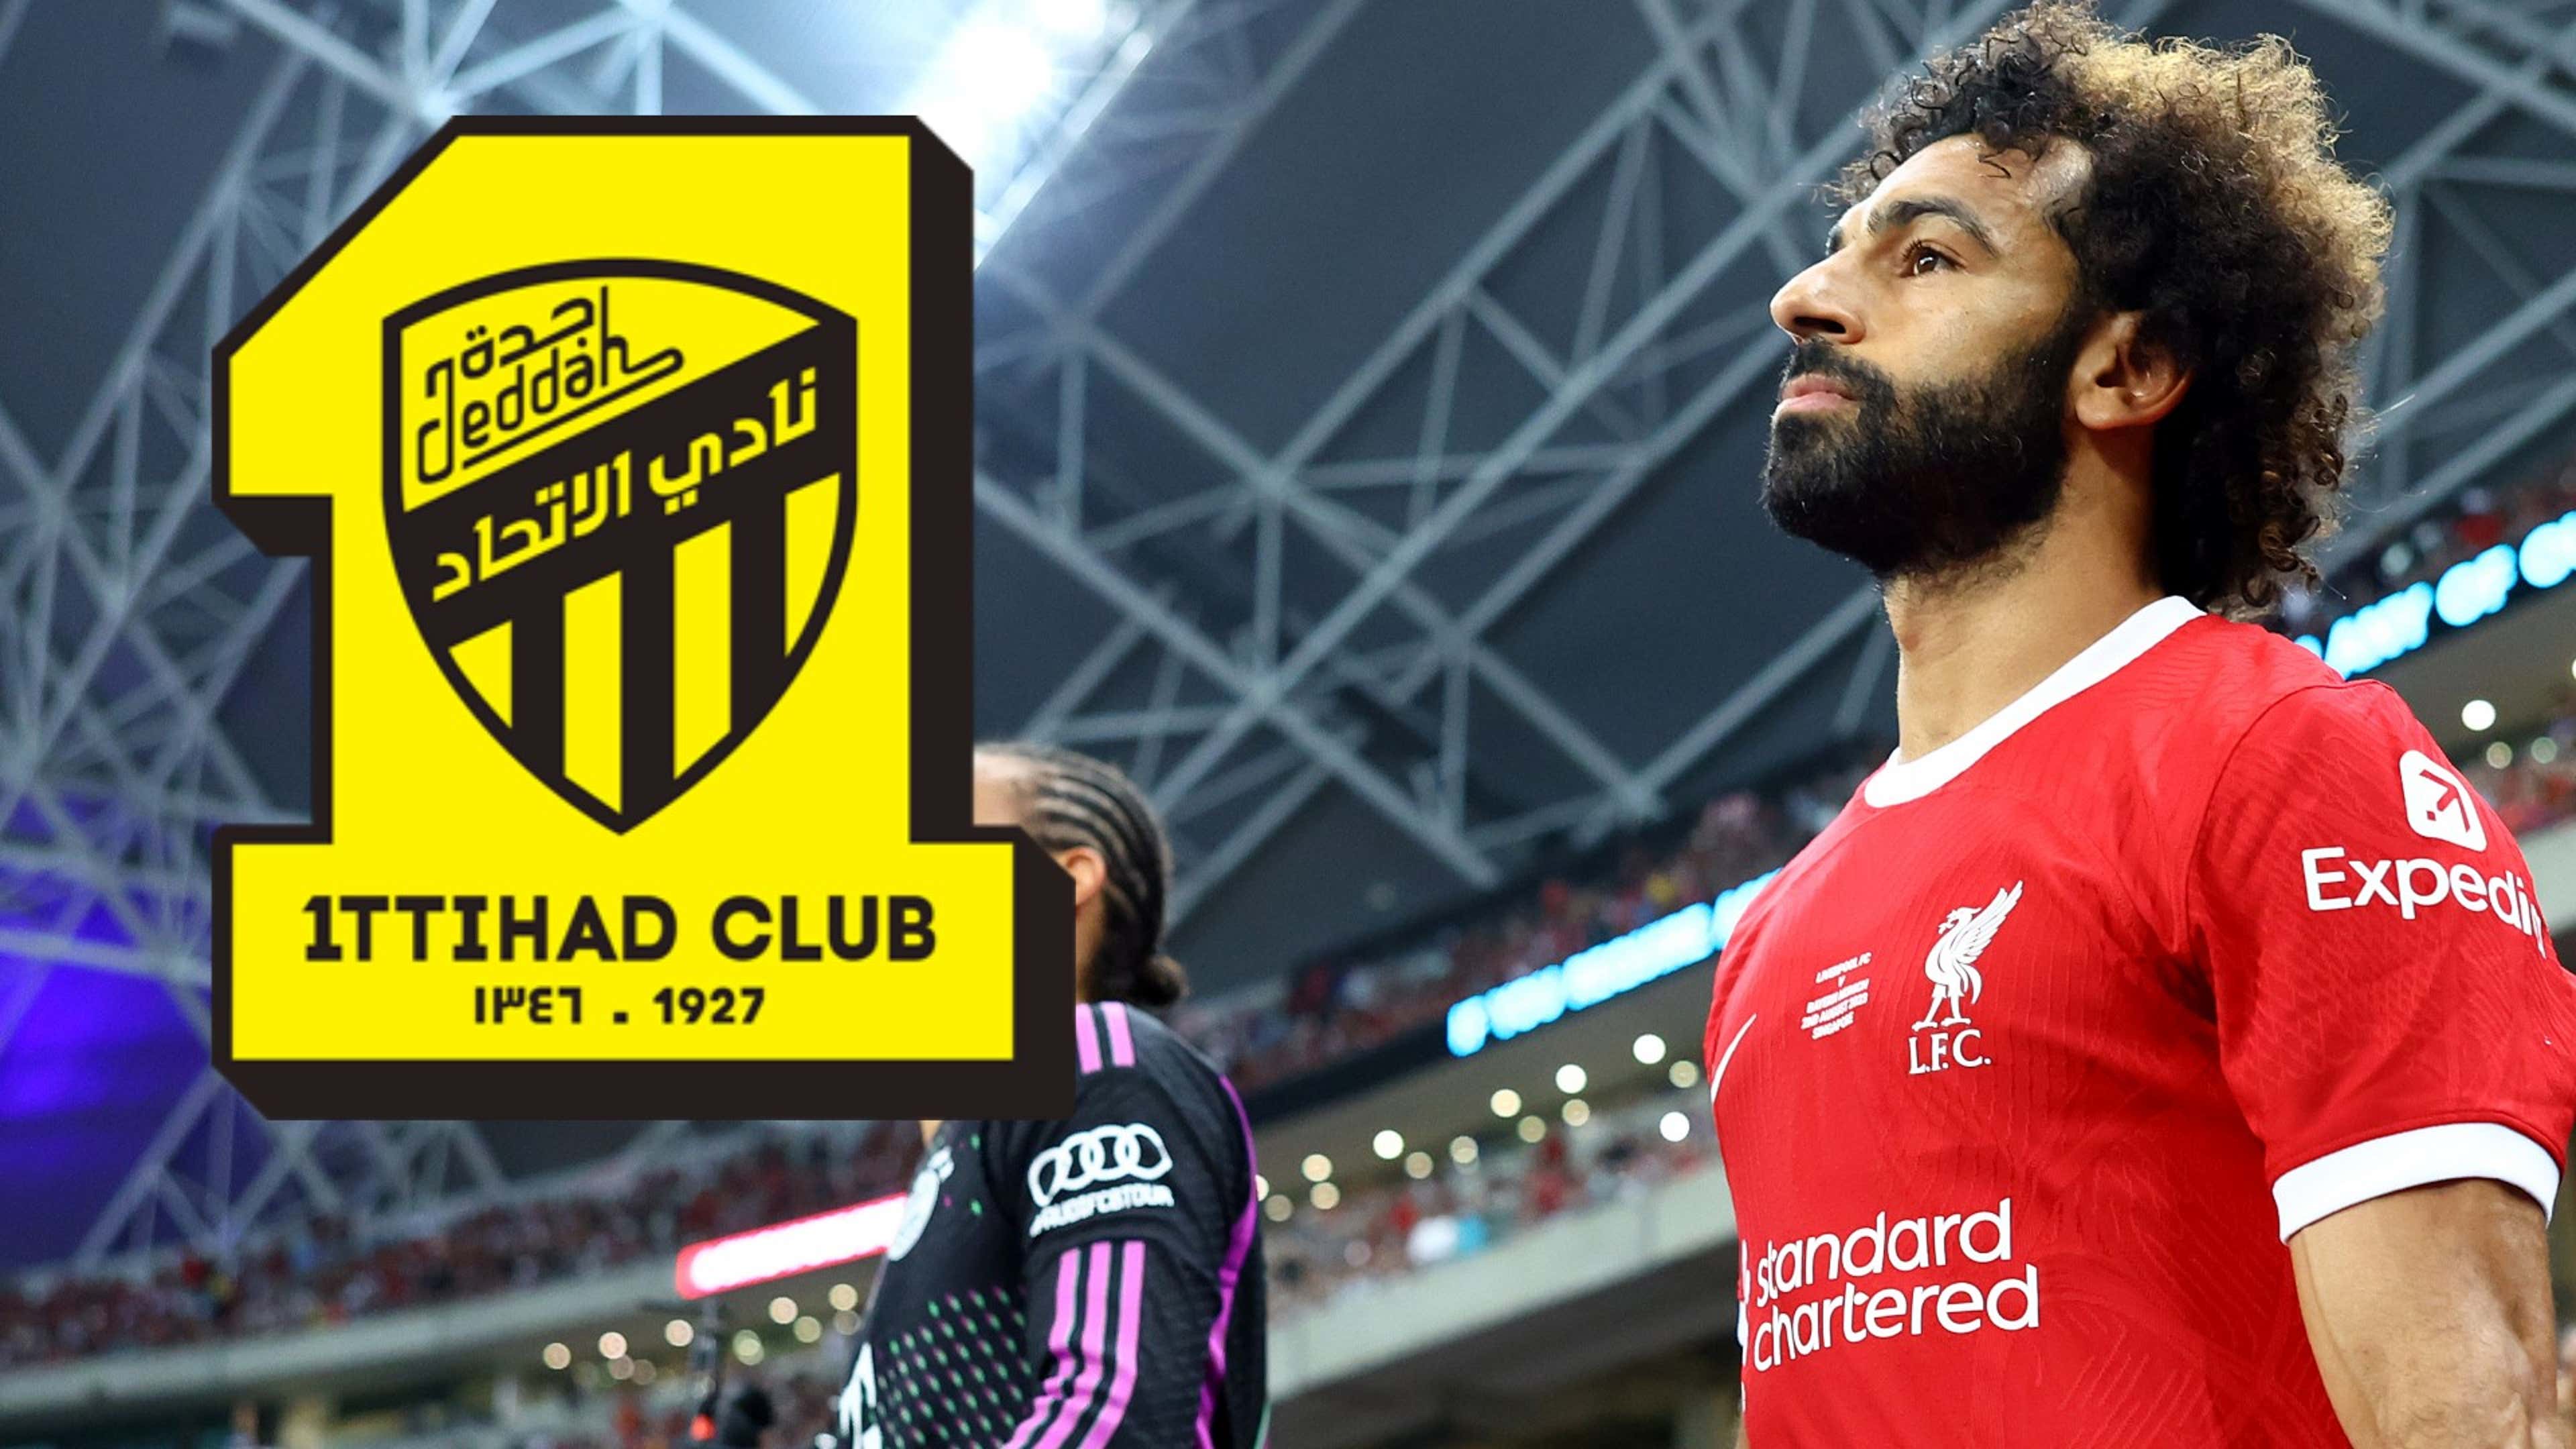 “Al-Ittihad Keeps Door Open for Improved Offer, Hinting at Ongoing Interest in Mohamed Salah”